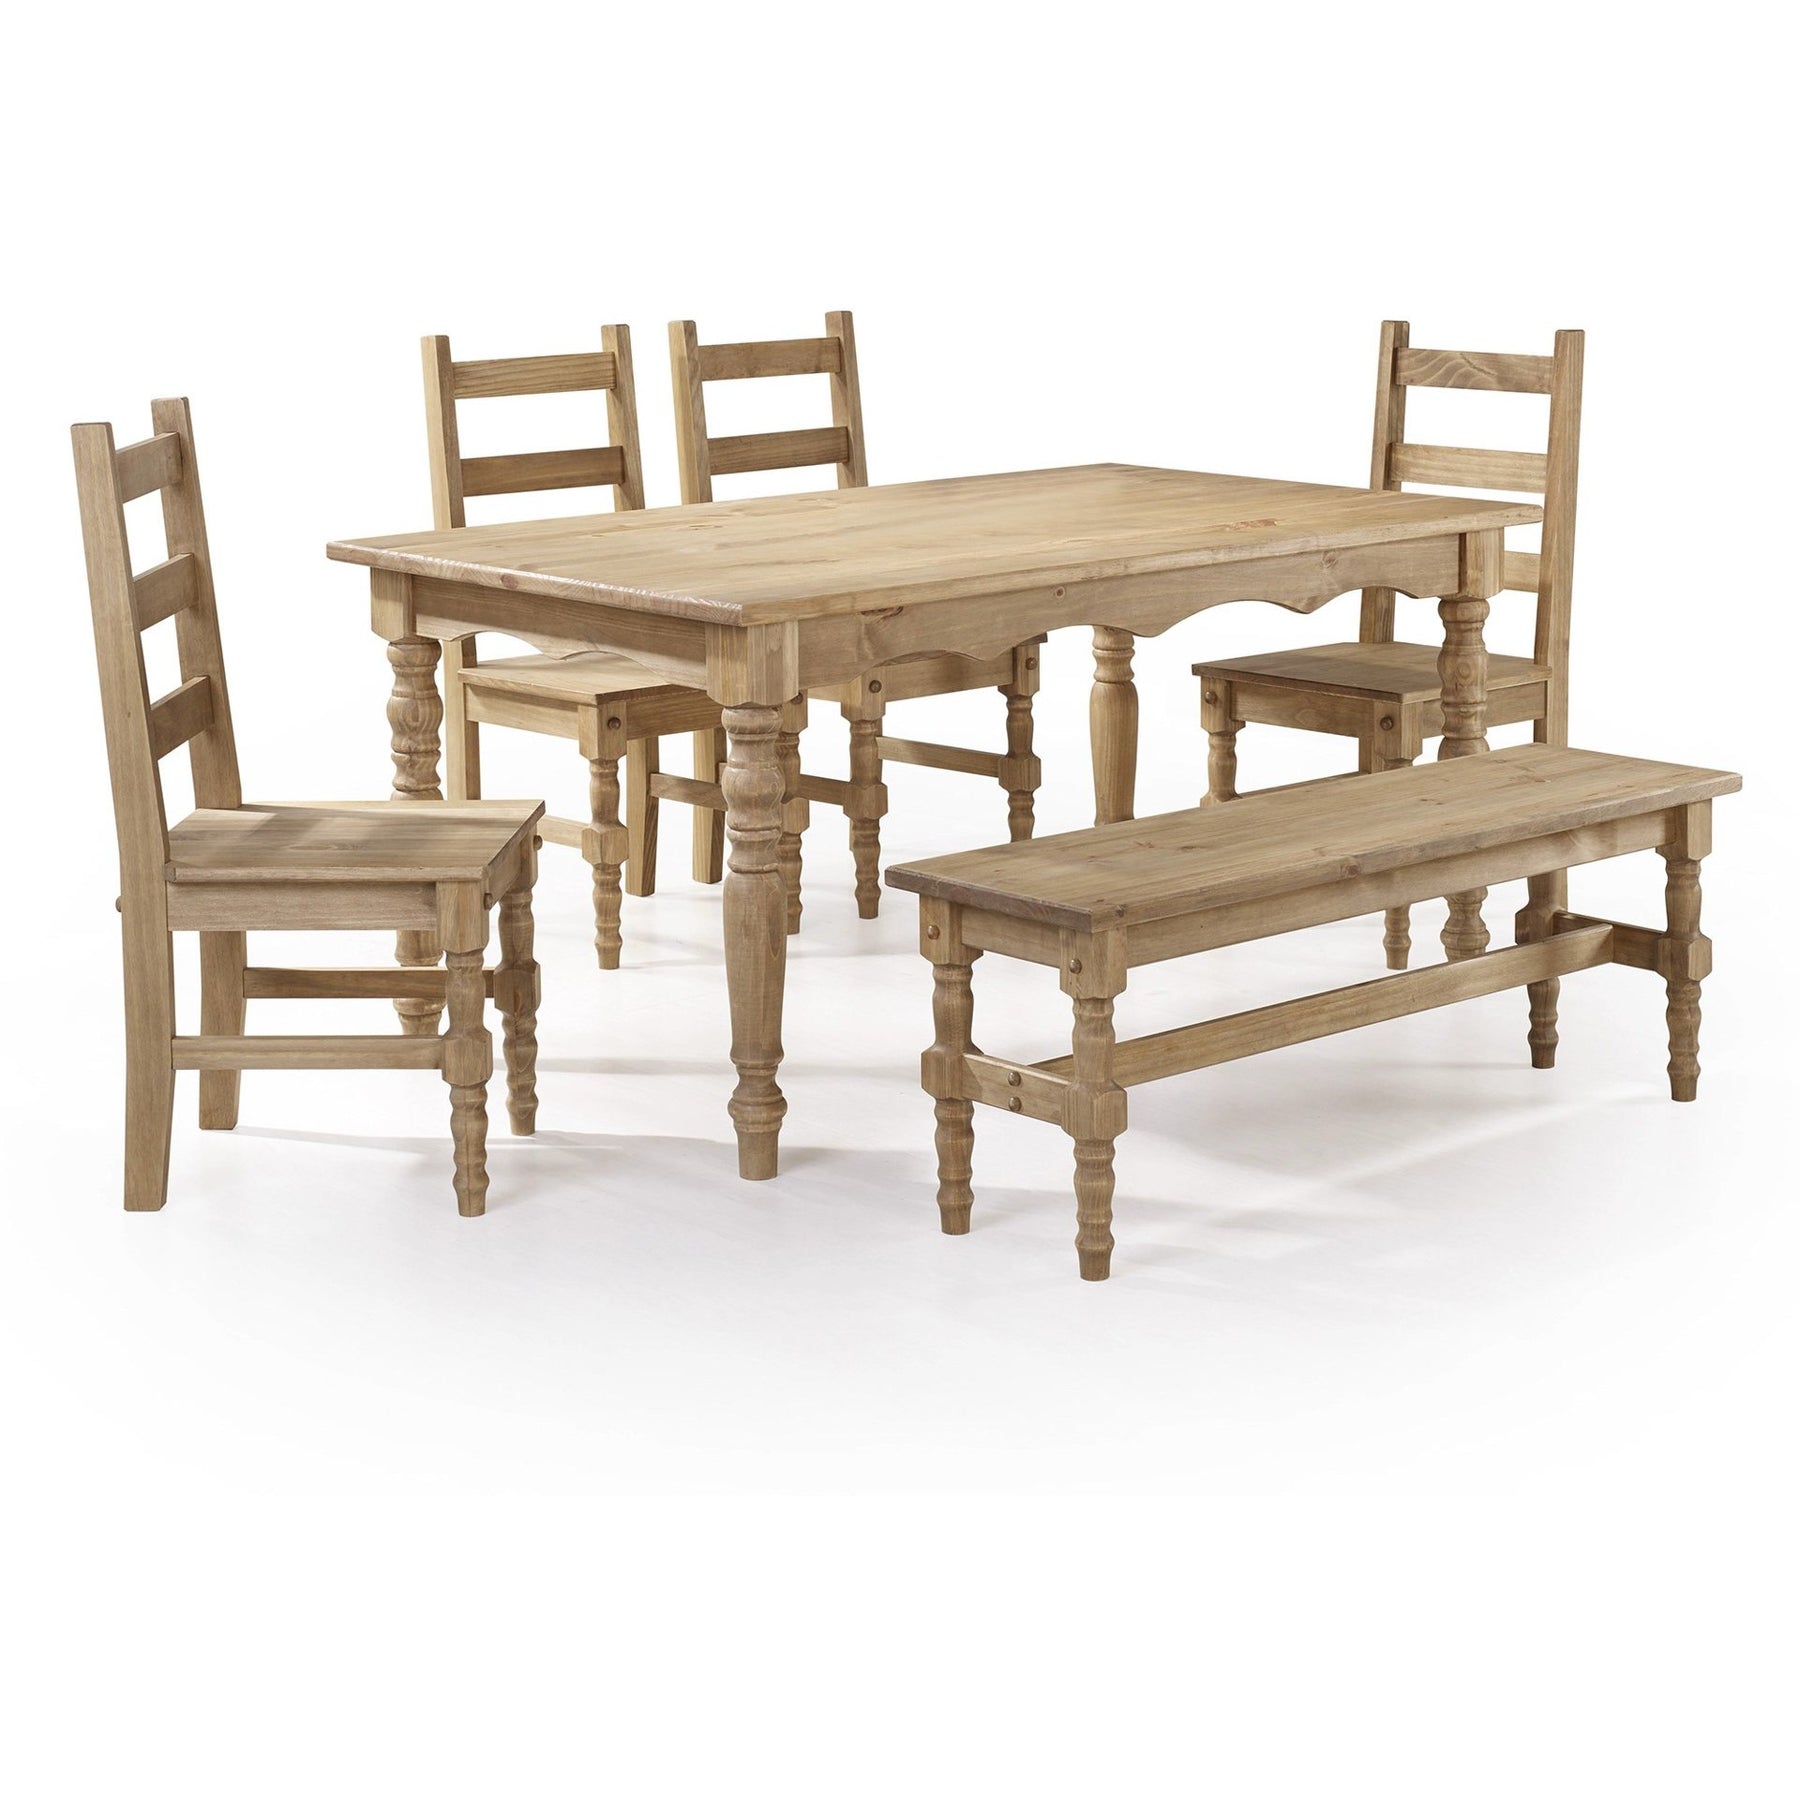 Manhattan Comfort Jay 6-Piece Solid Wood Dining Set with 1 Bench, 4 Chairs, and 1 Table in Nature-Minimal & Modern